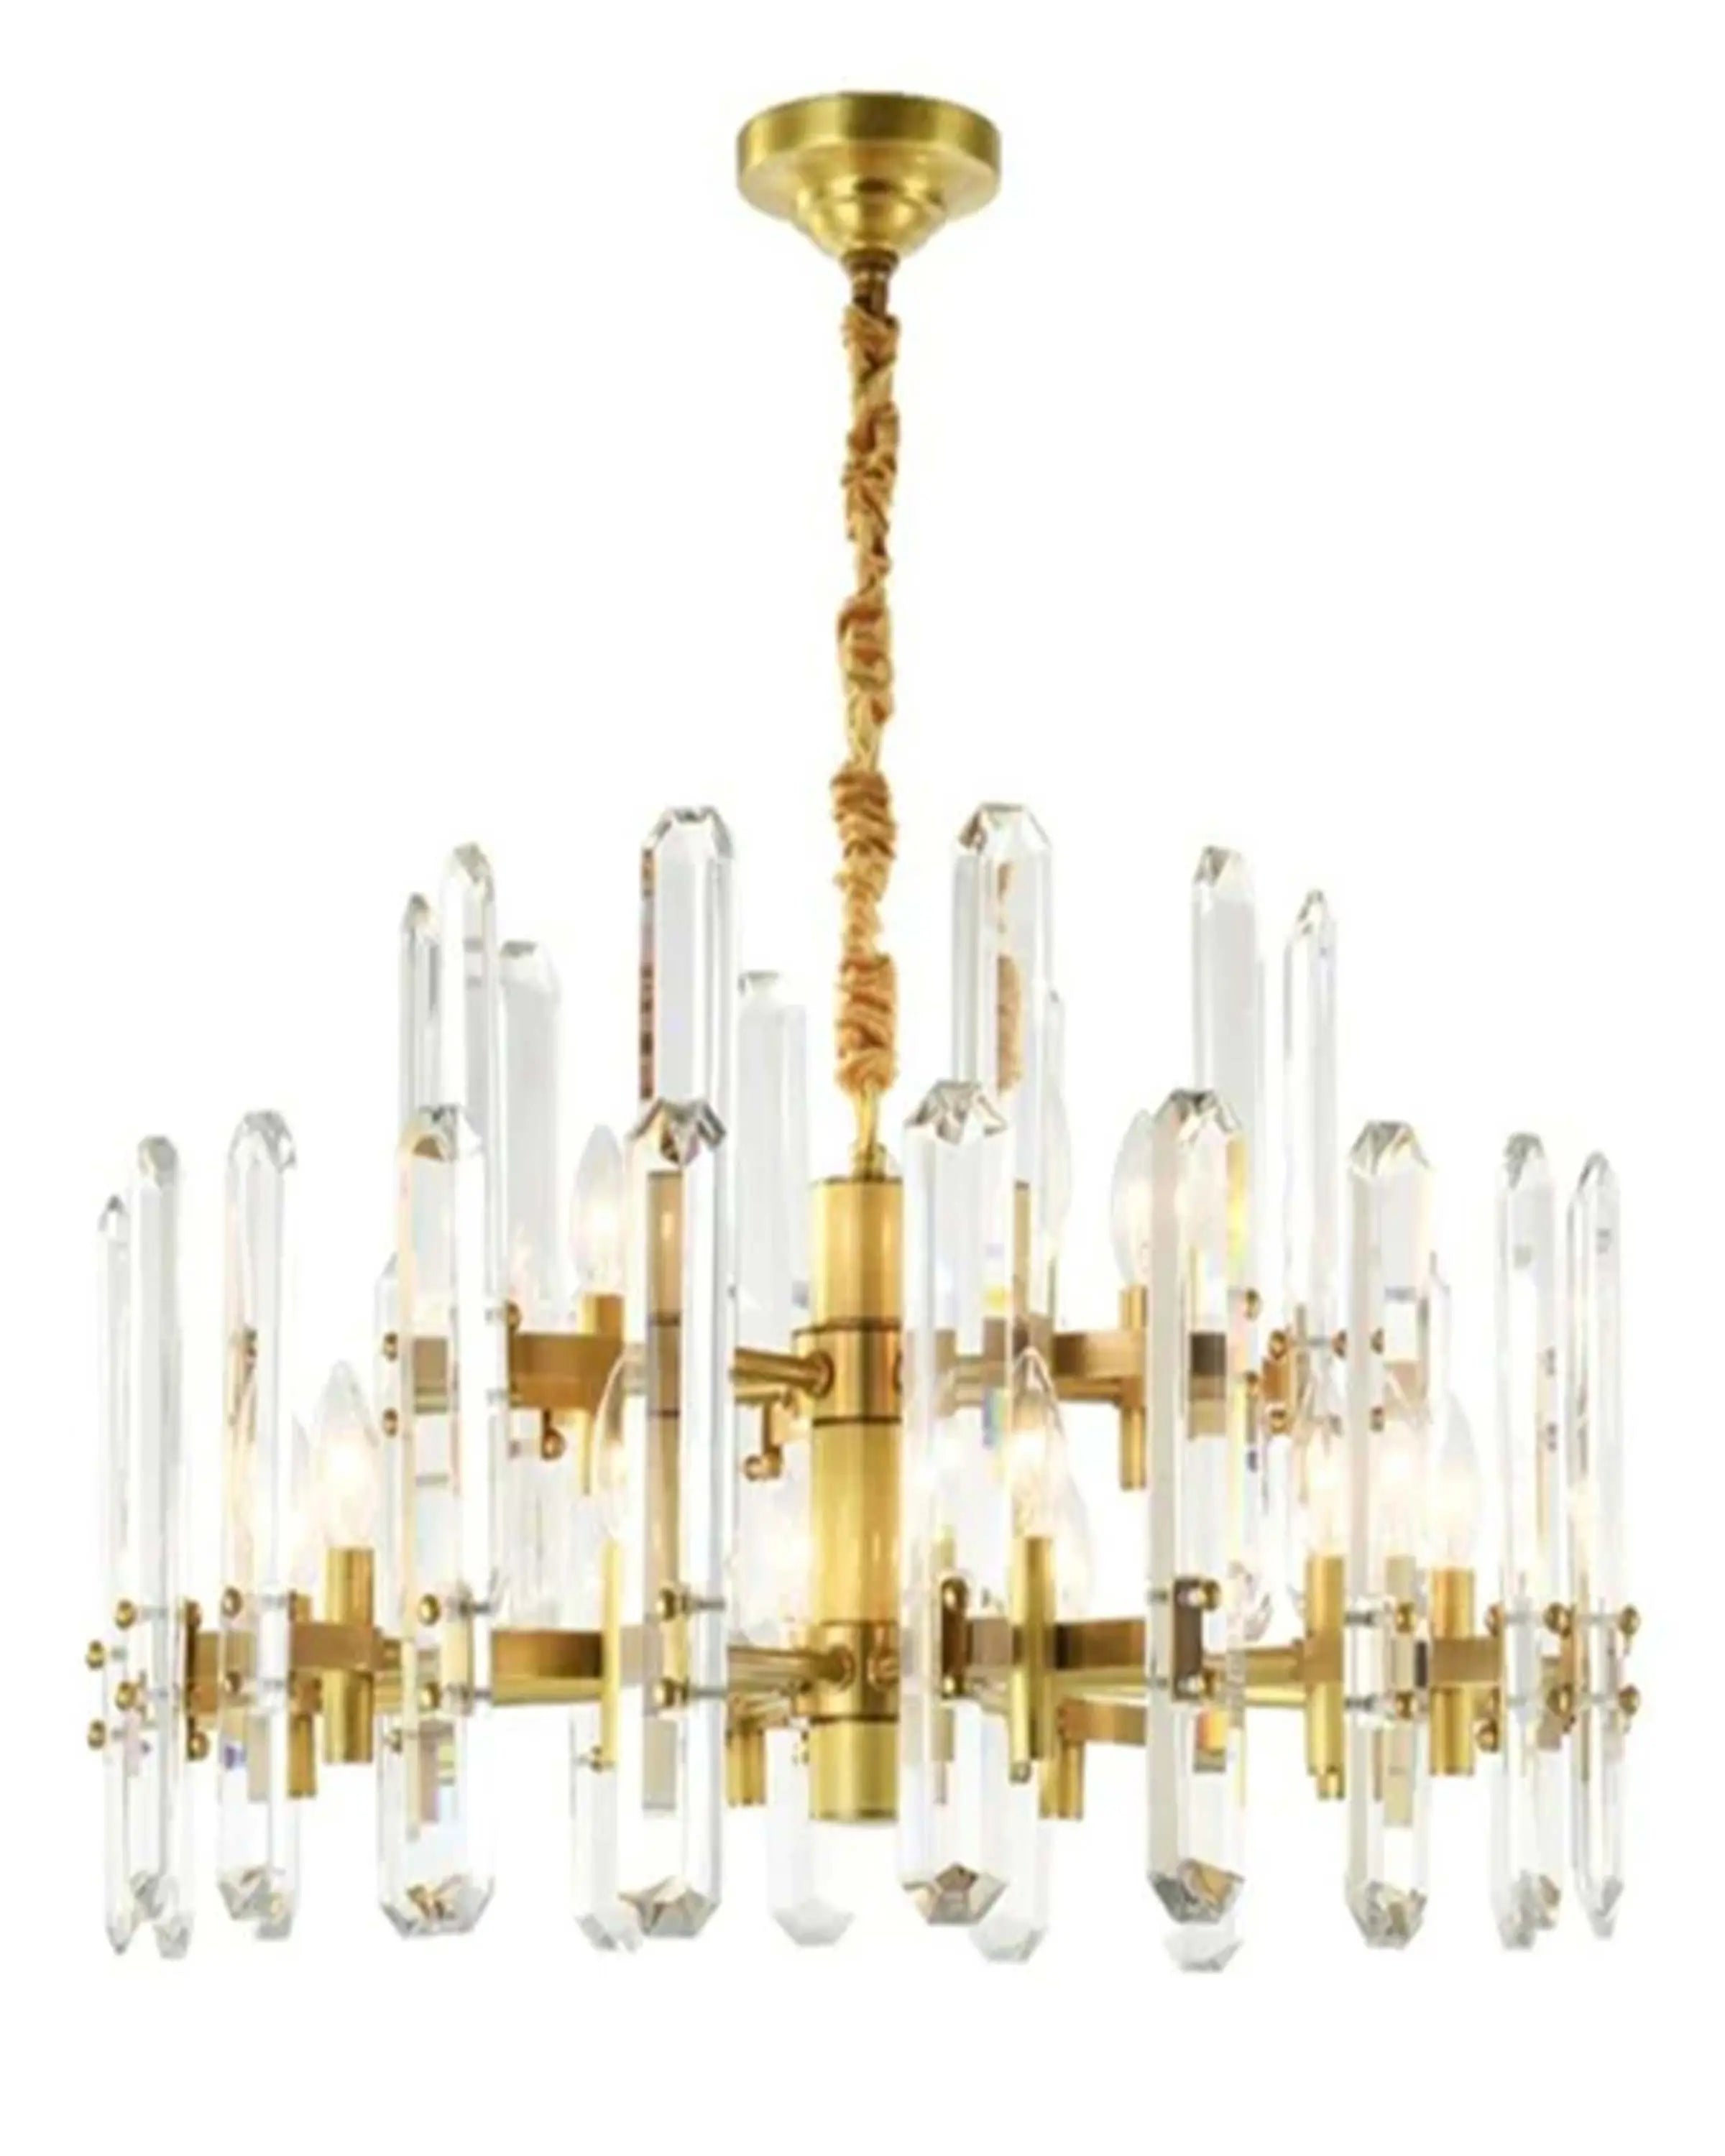 Ismoil Gold Crystal Chandelier ANGIE HOMES